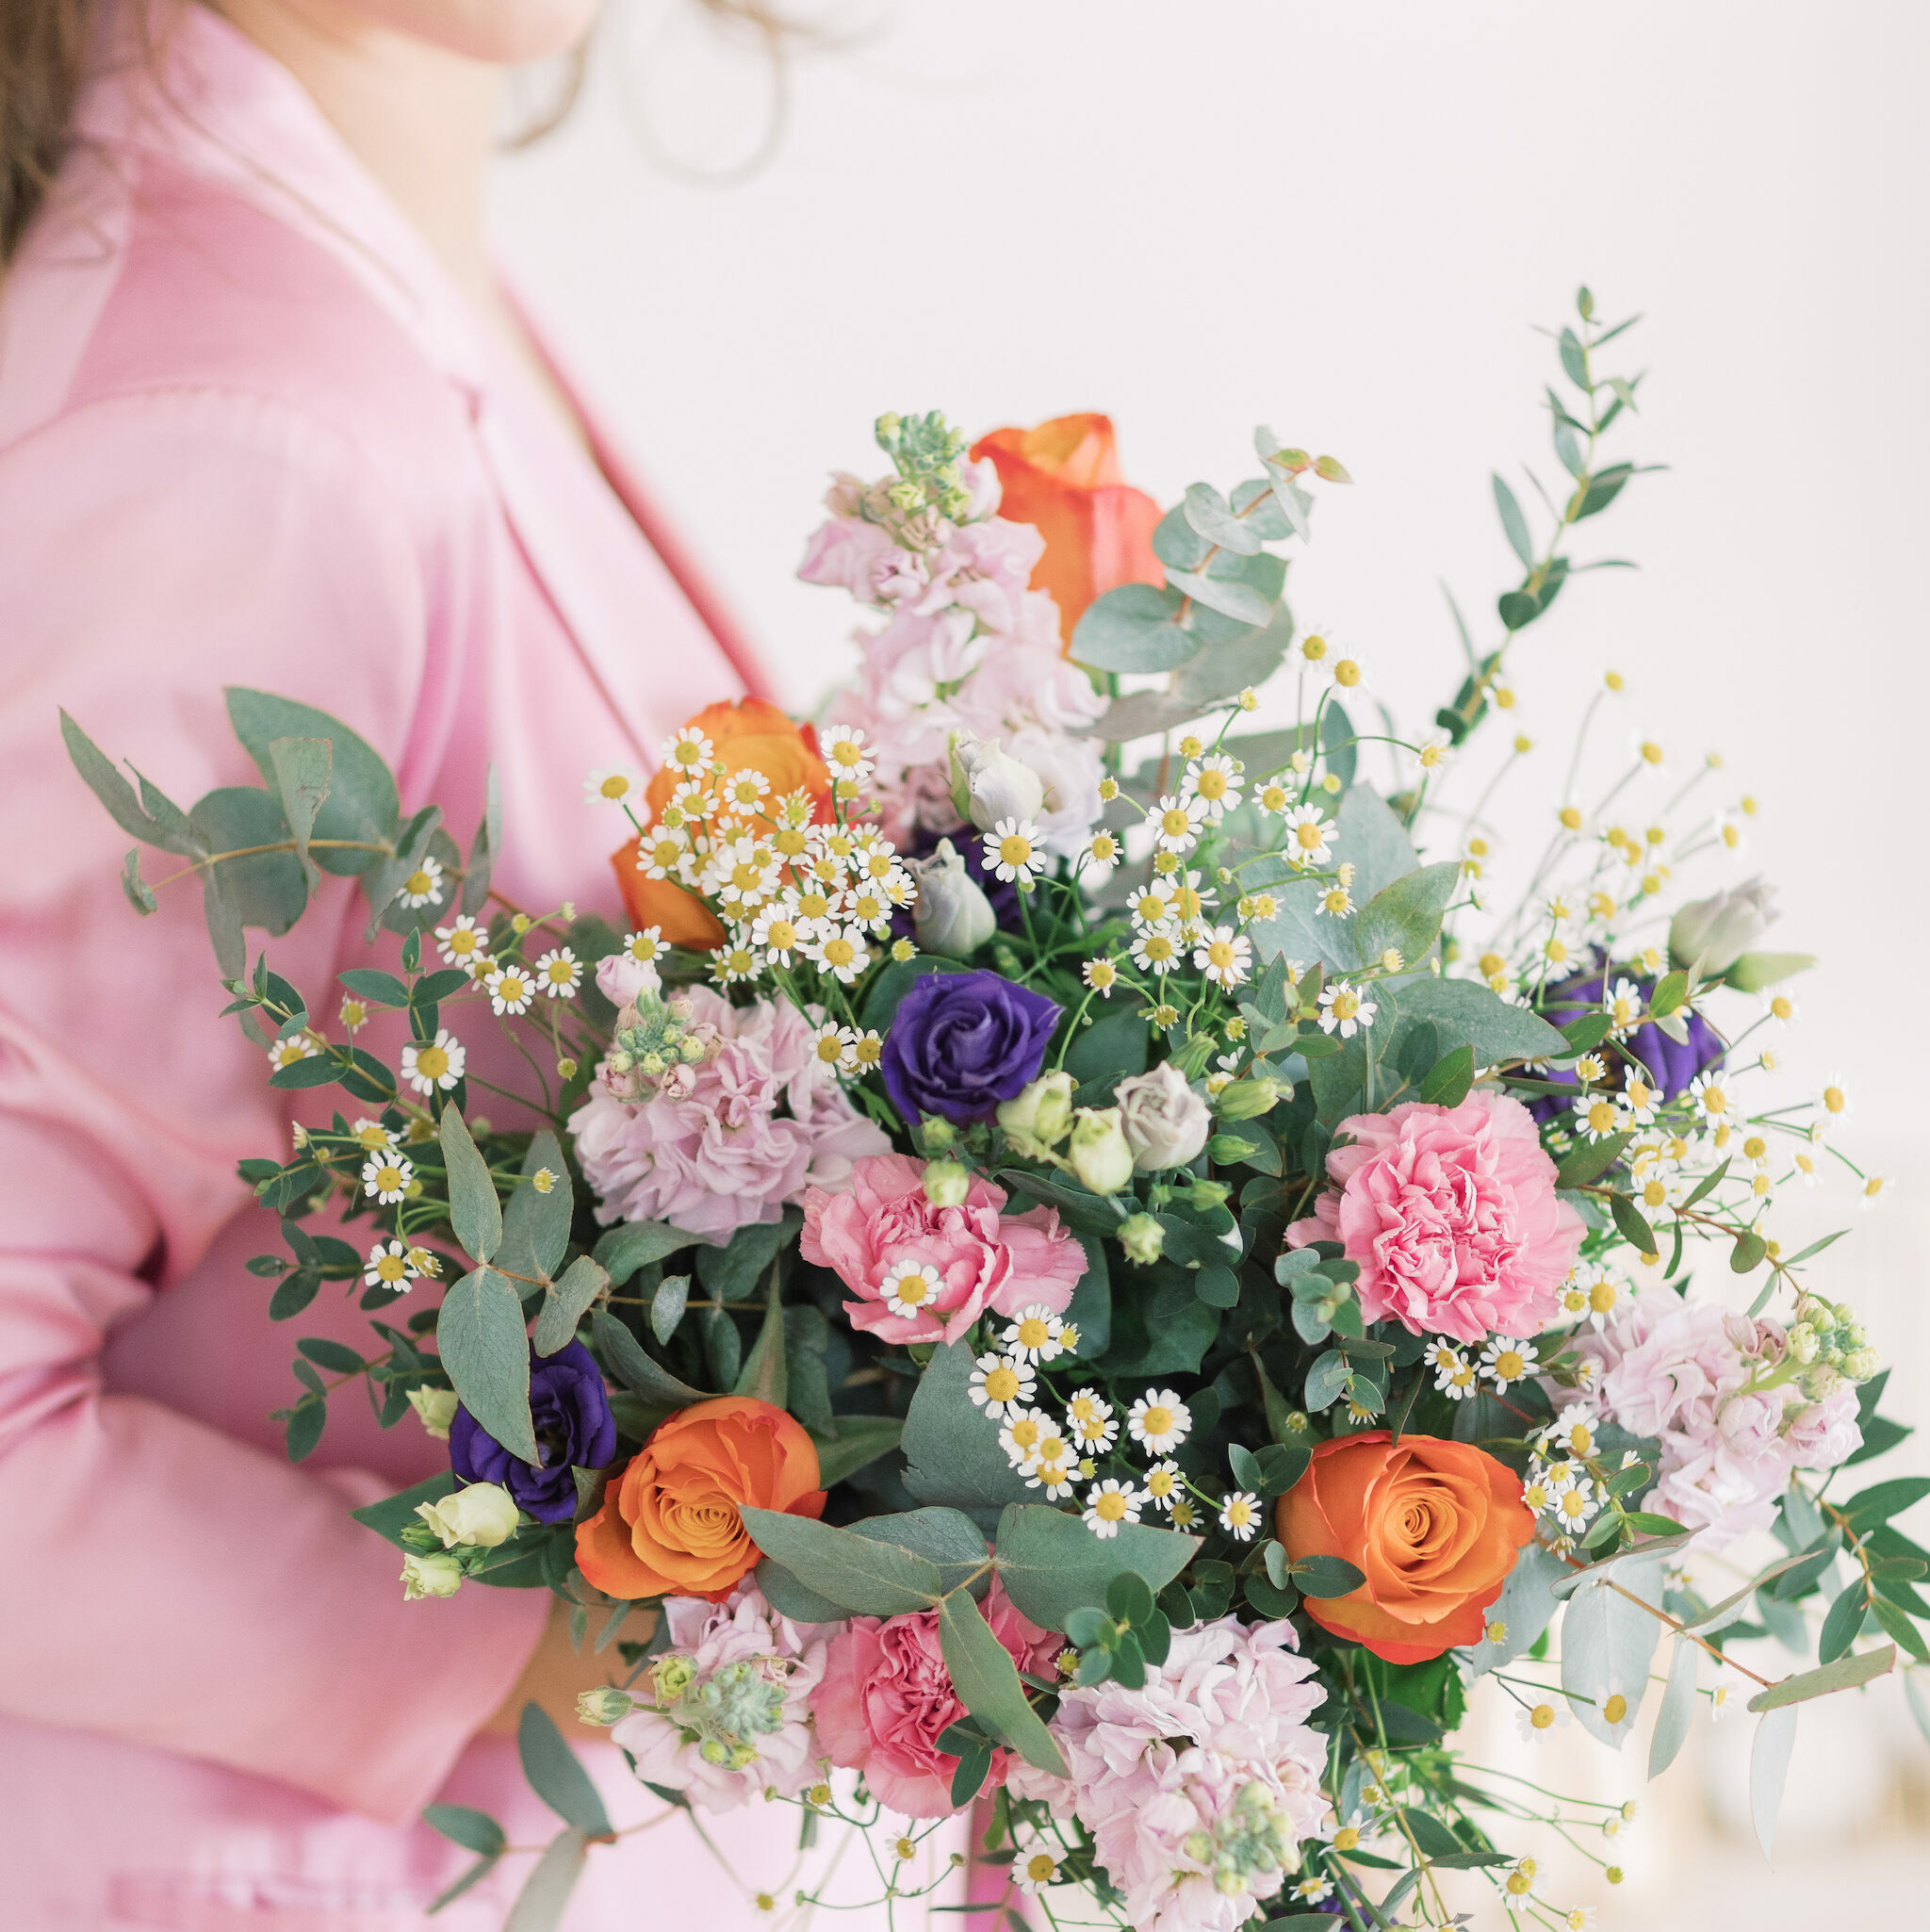 Send a bouquet to Anvers within 24 hours